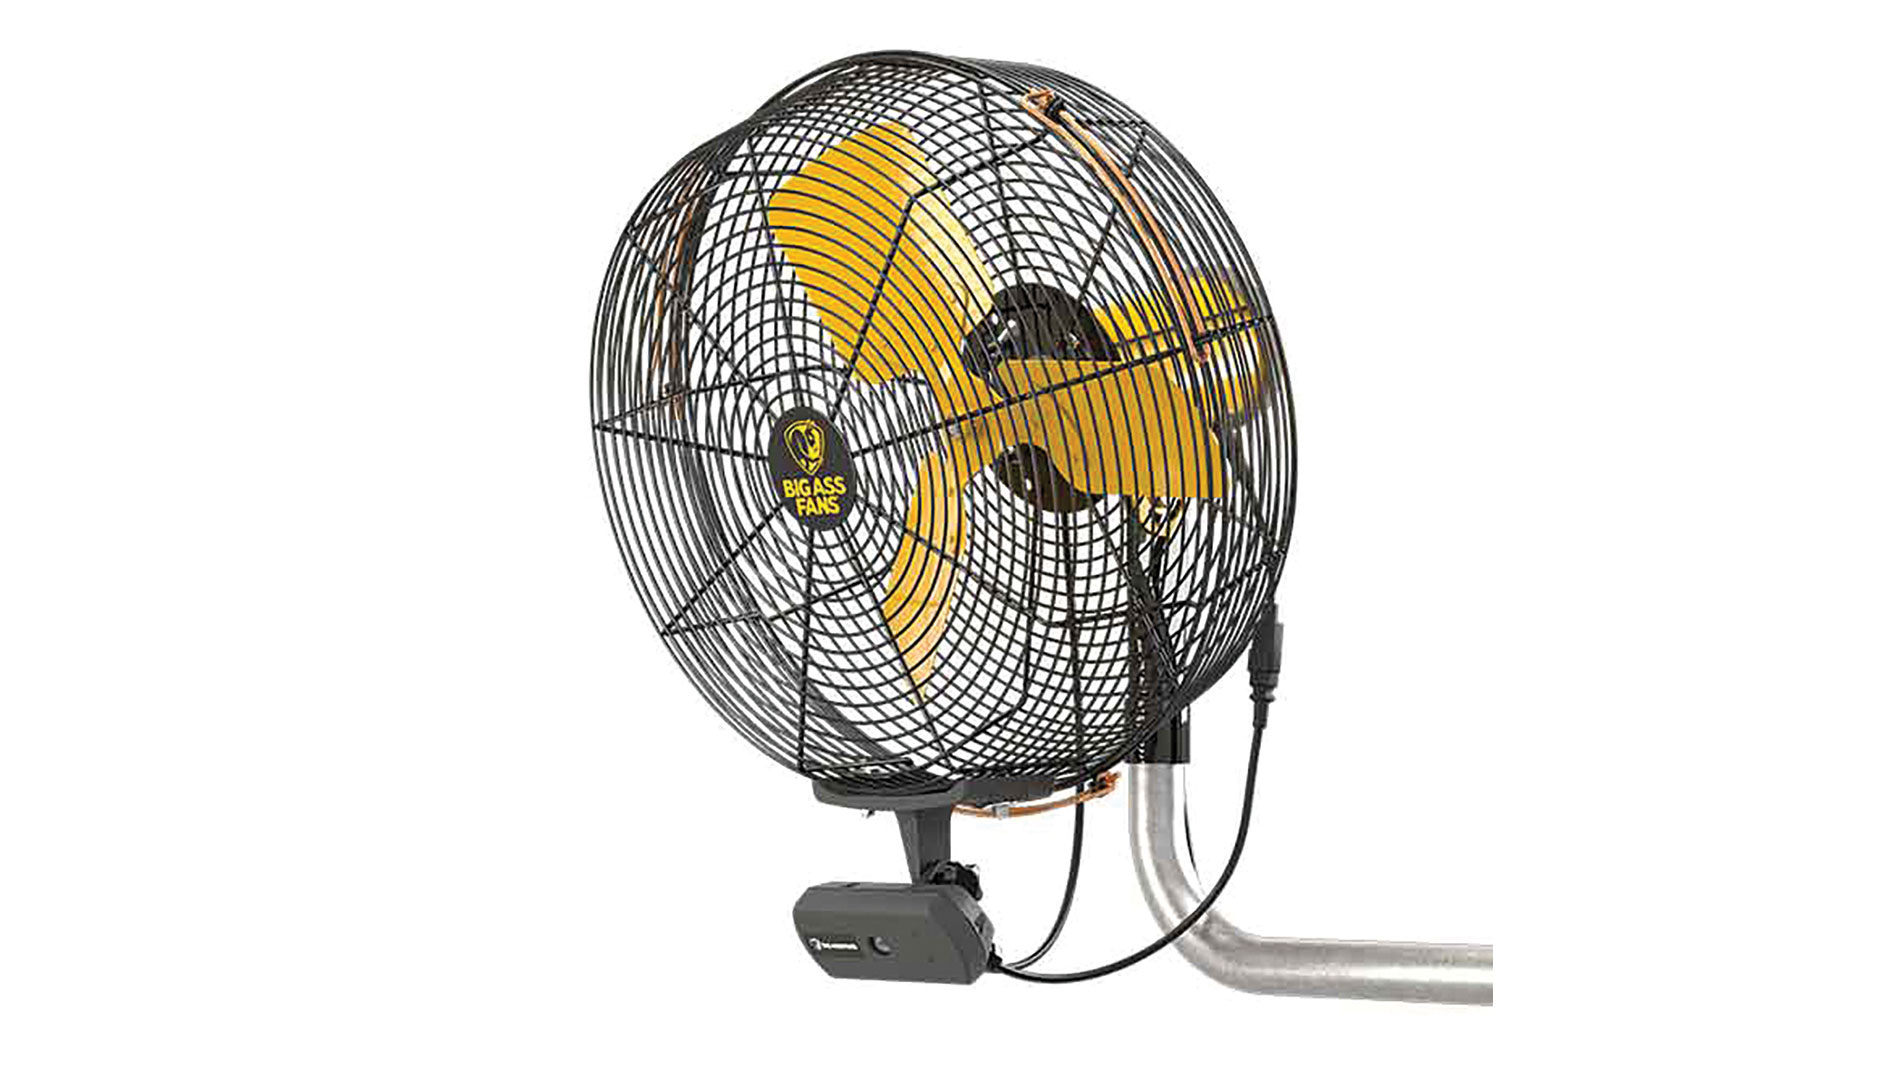 Black and yellow fan with the Big Ass Fans logo.